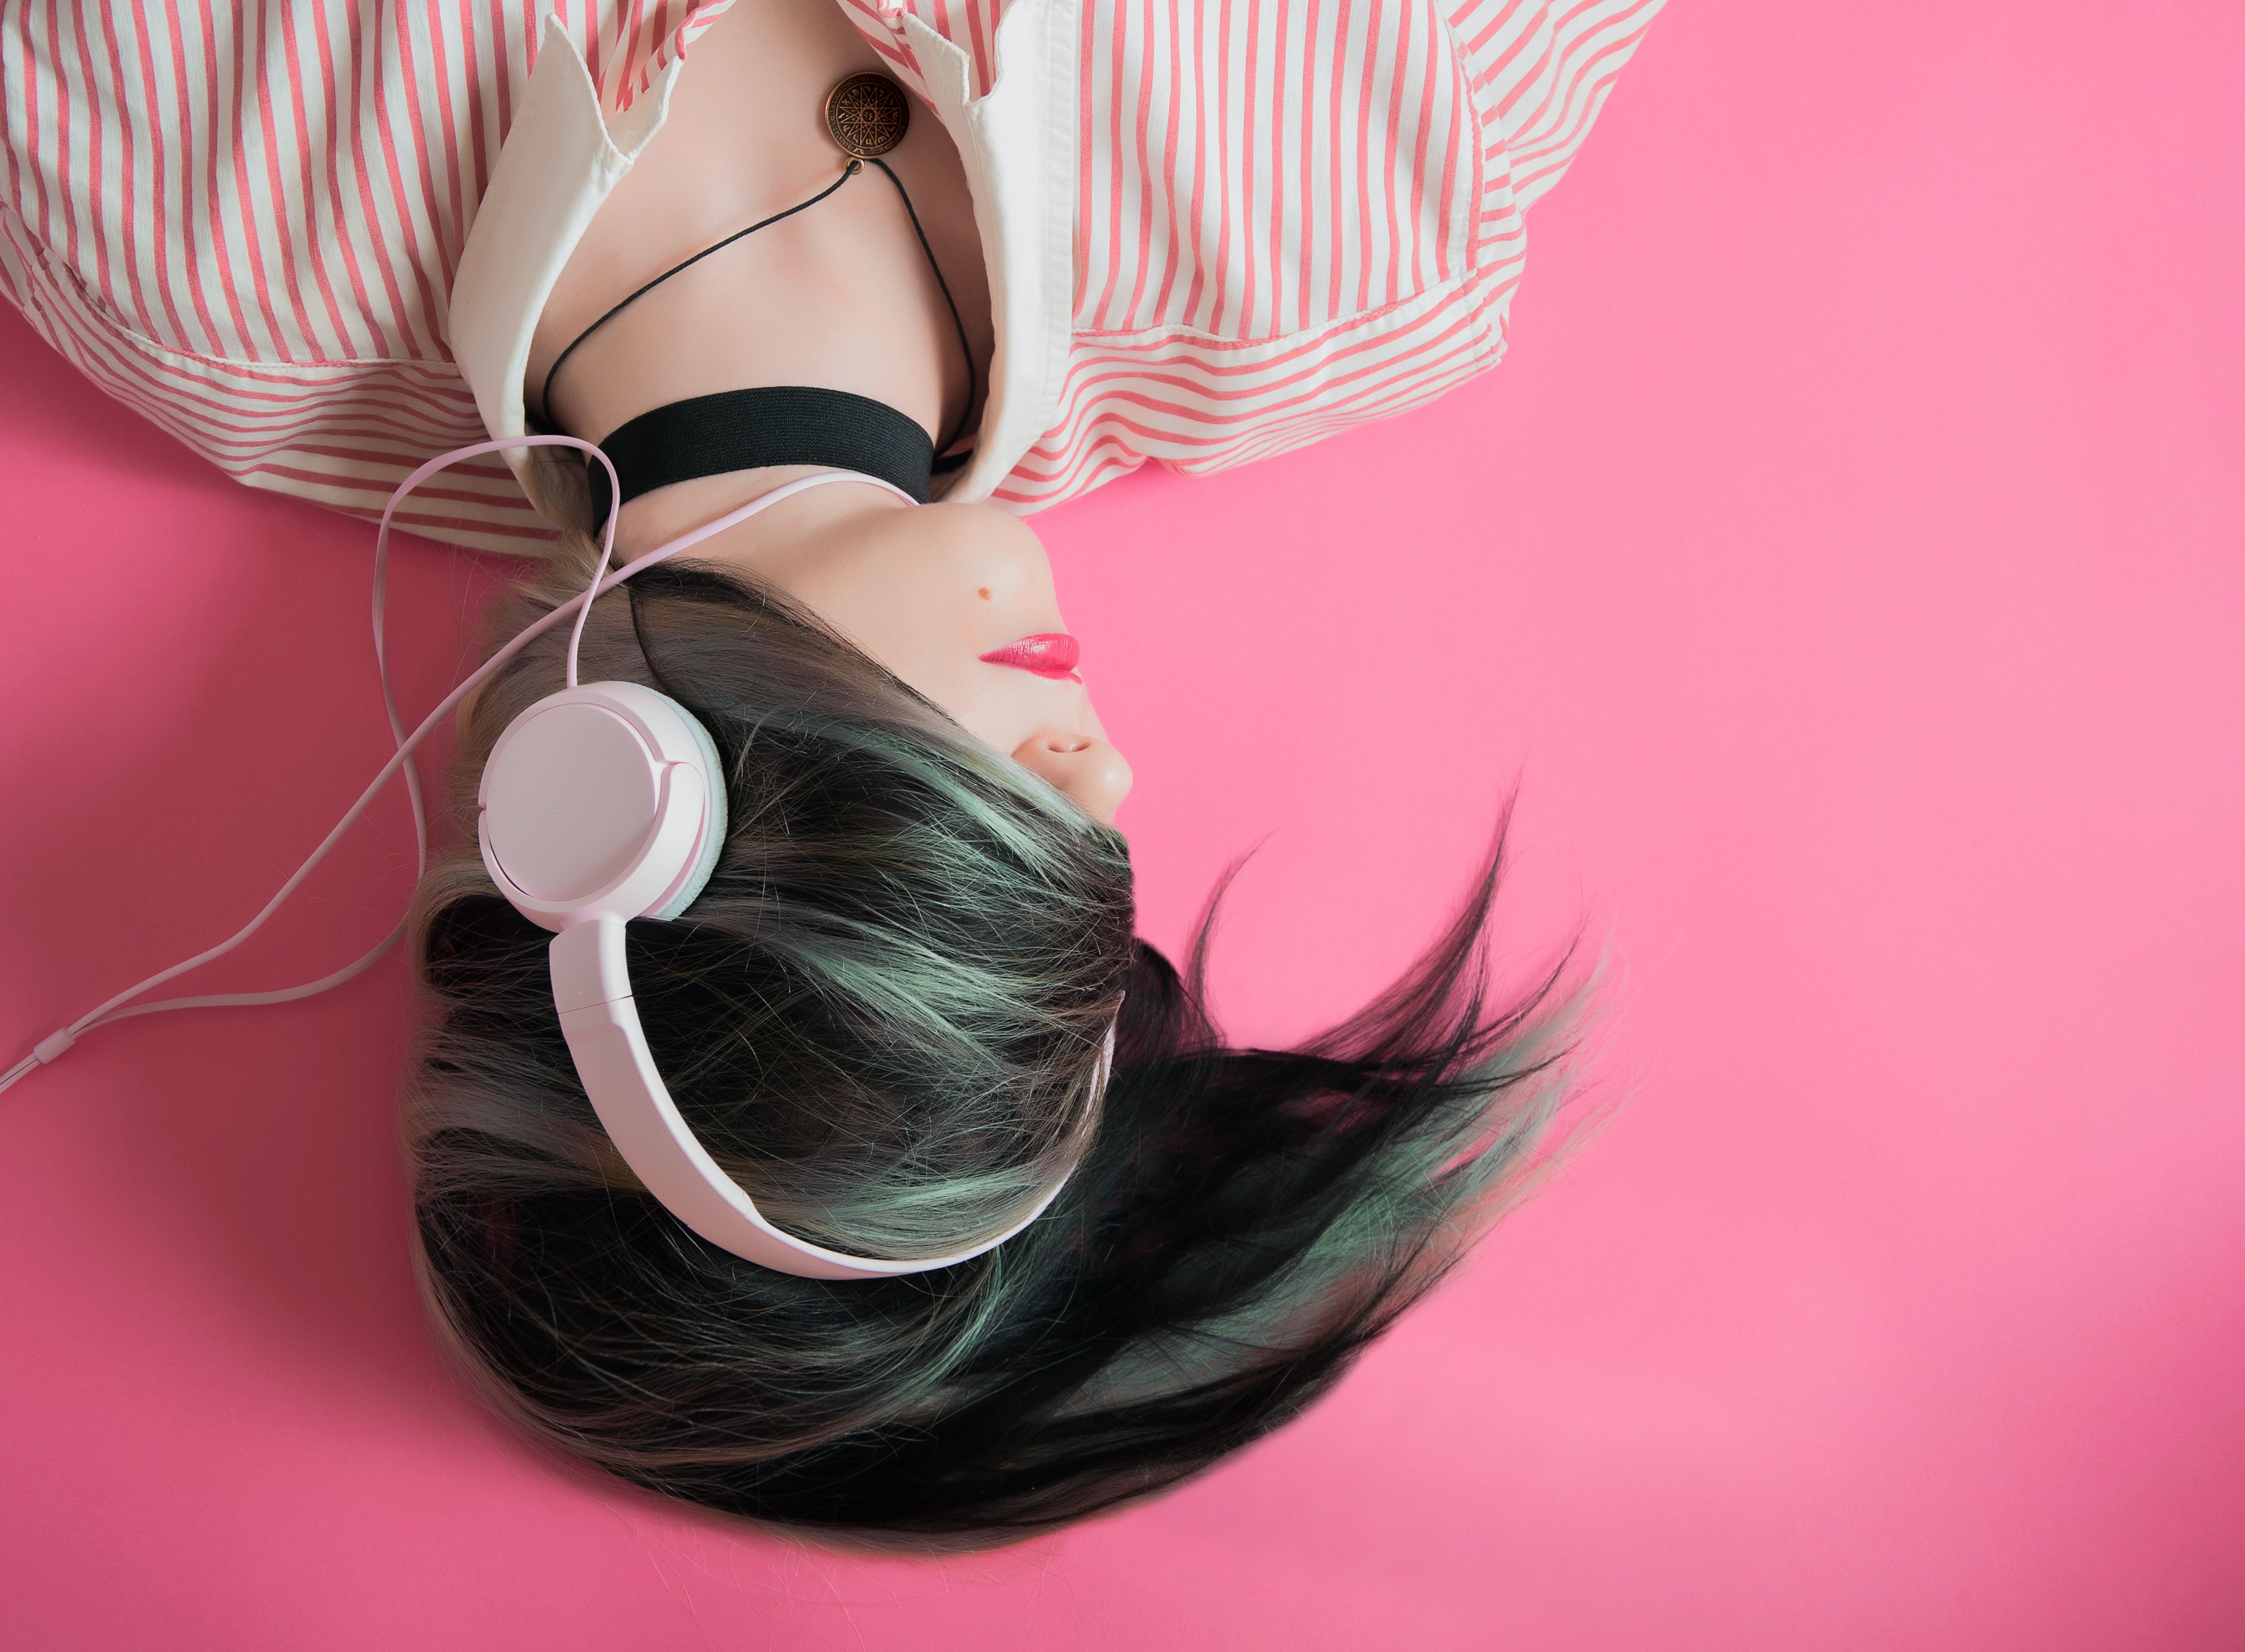 woman-lying-with-headphones-on-pink-background.jpg